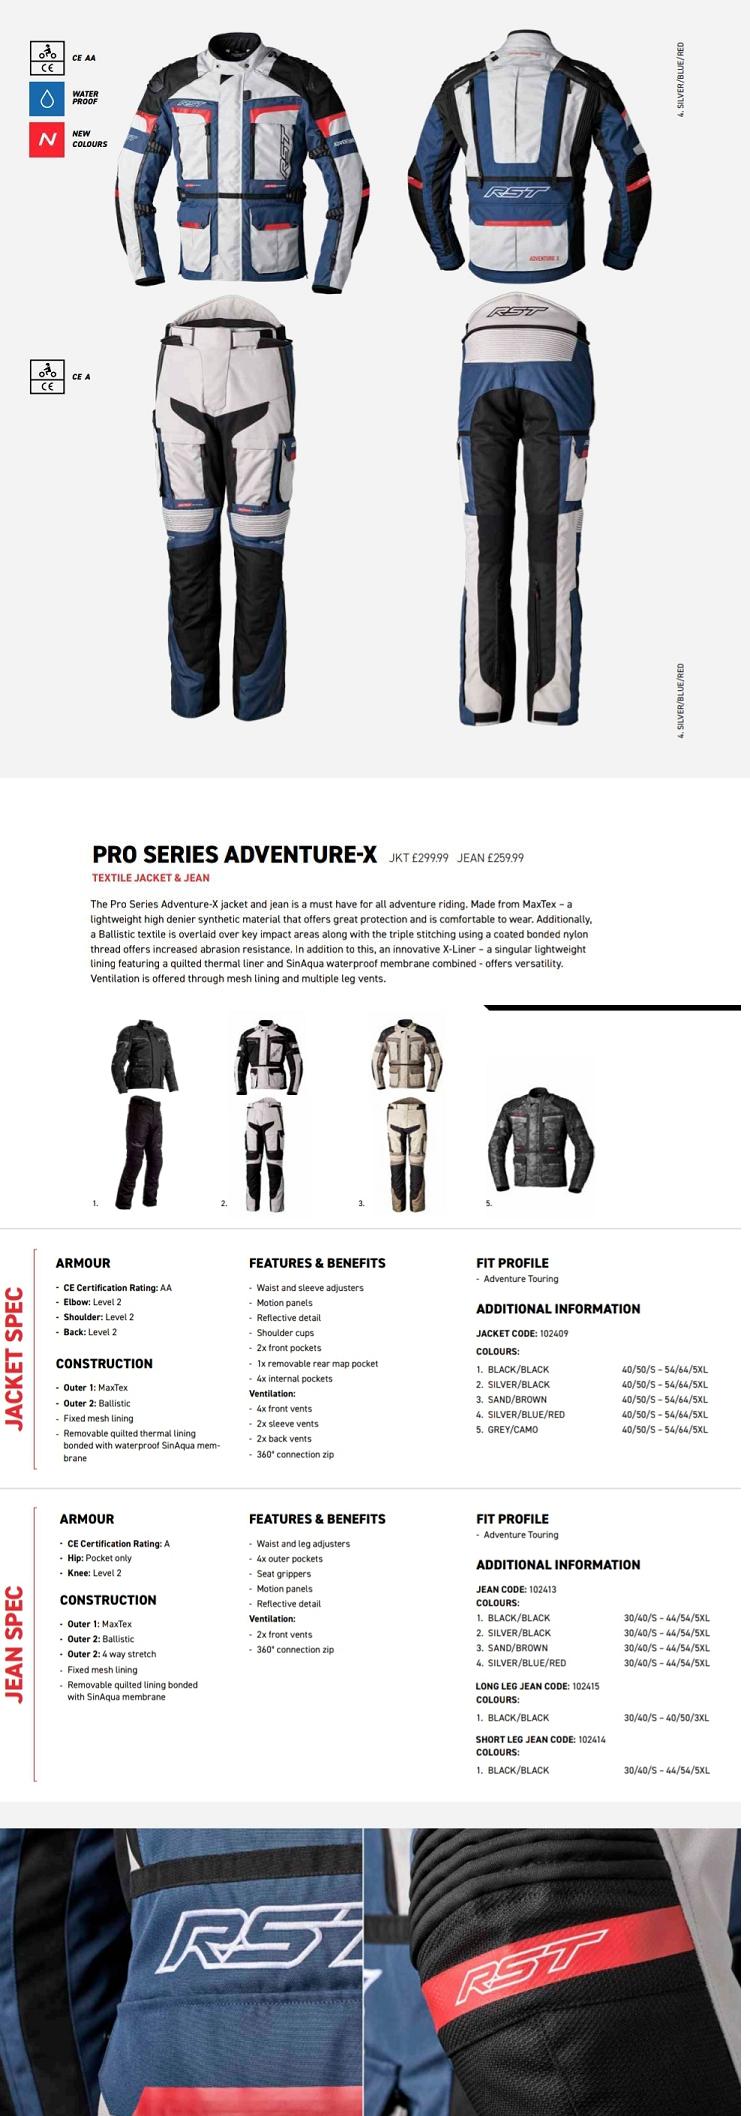 RST Pro Series Adventure X textile jacket and pant